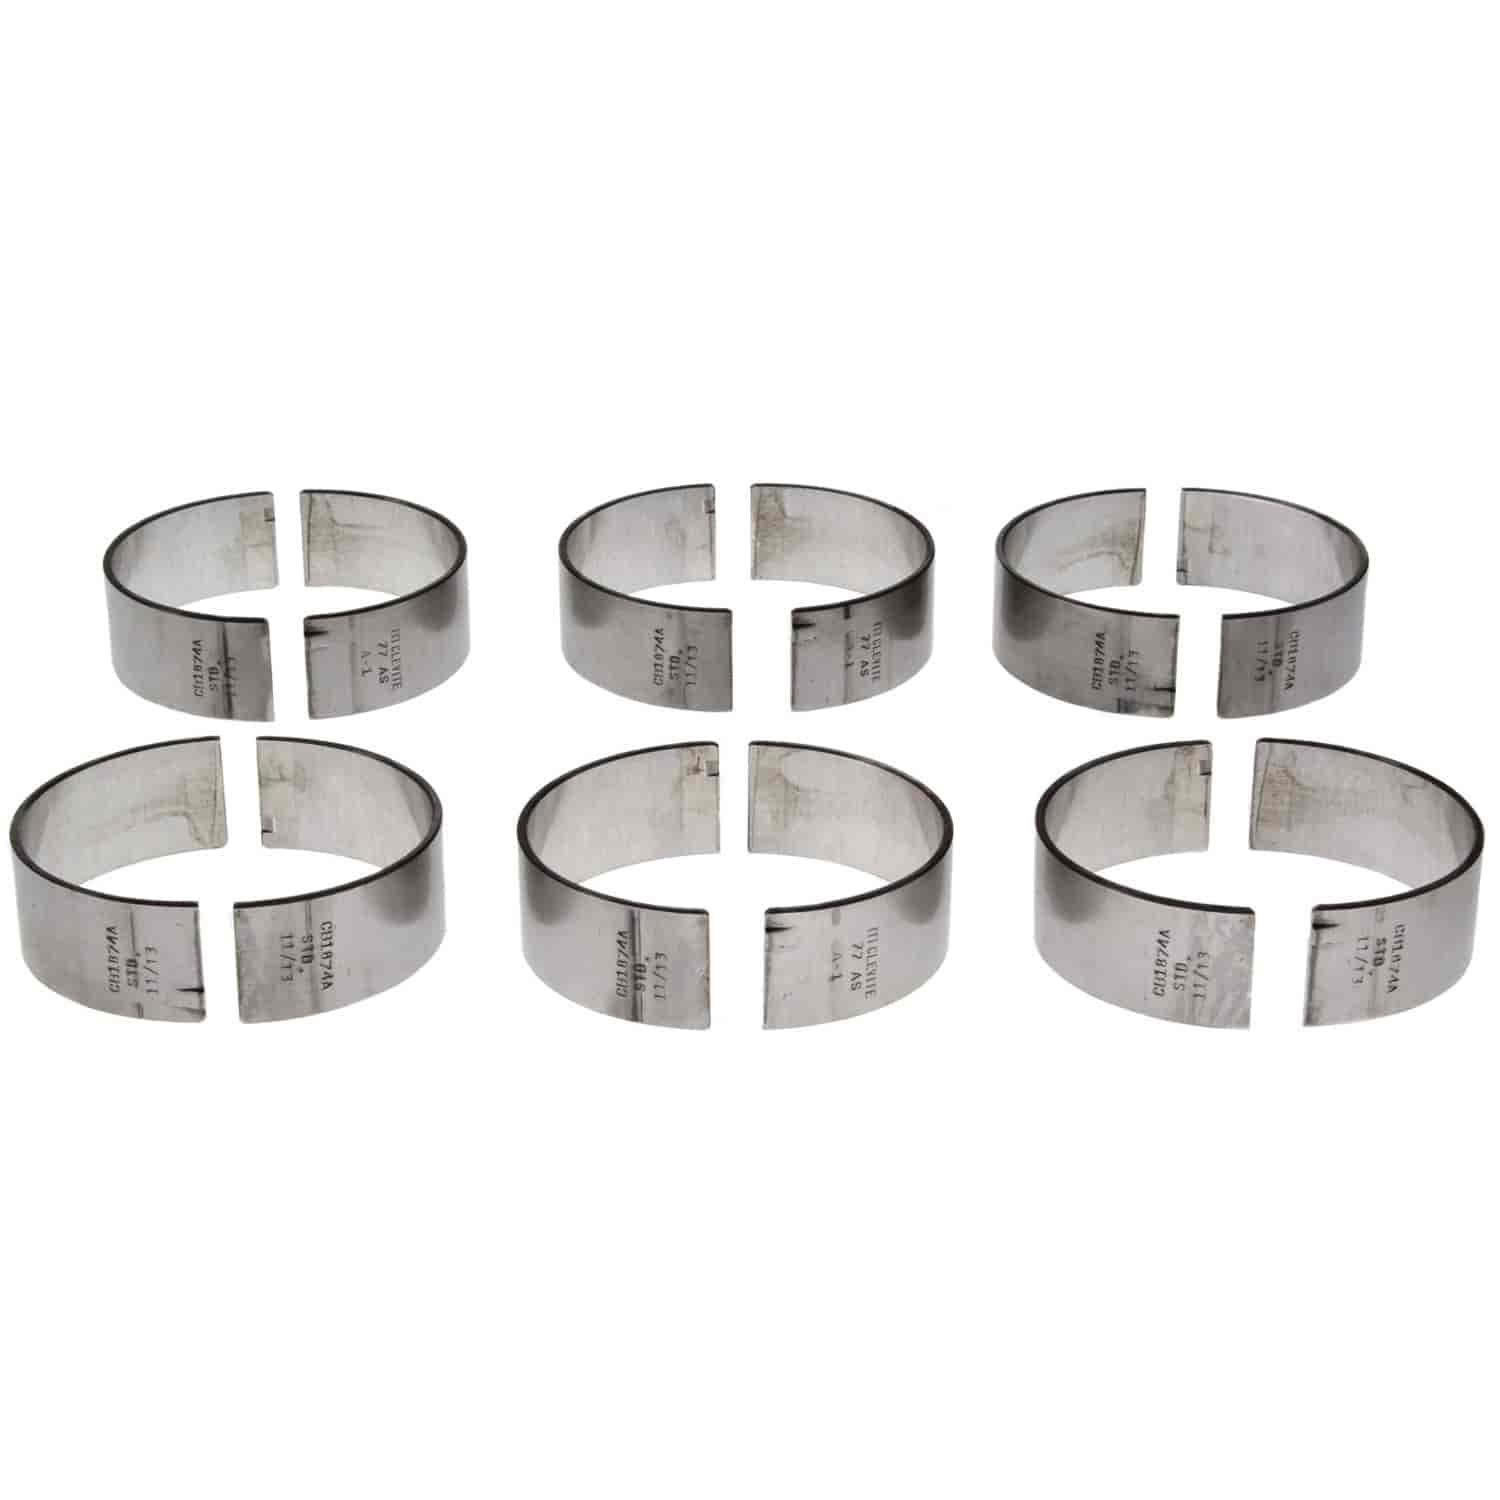 Connecting Rod Bearing Set Chevy 1985-2013 V6 4.3L with -.030" Undersize and Resized Rods